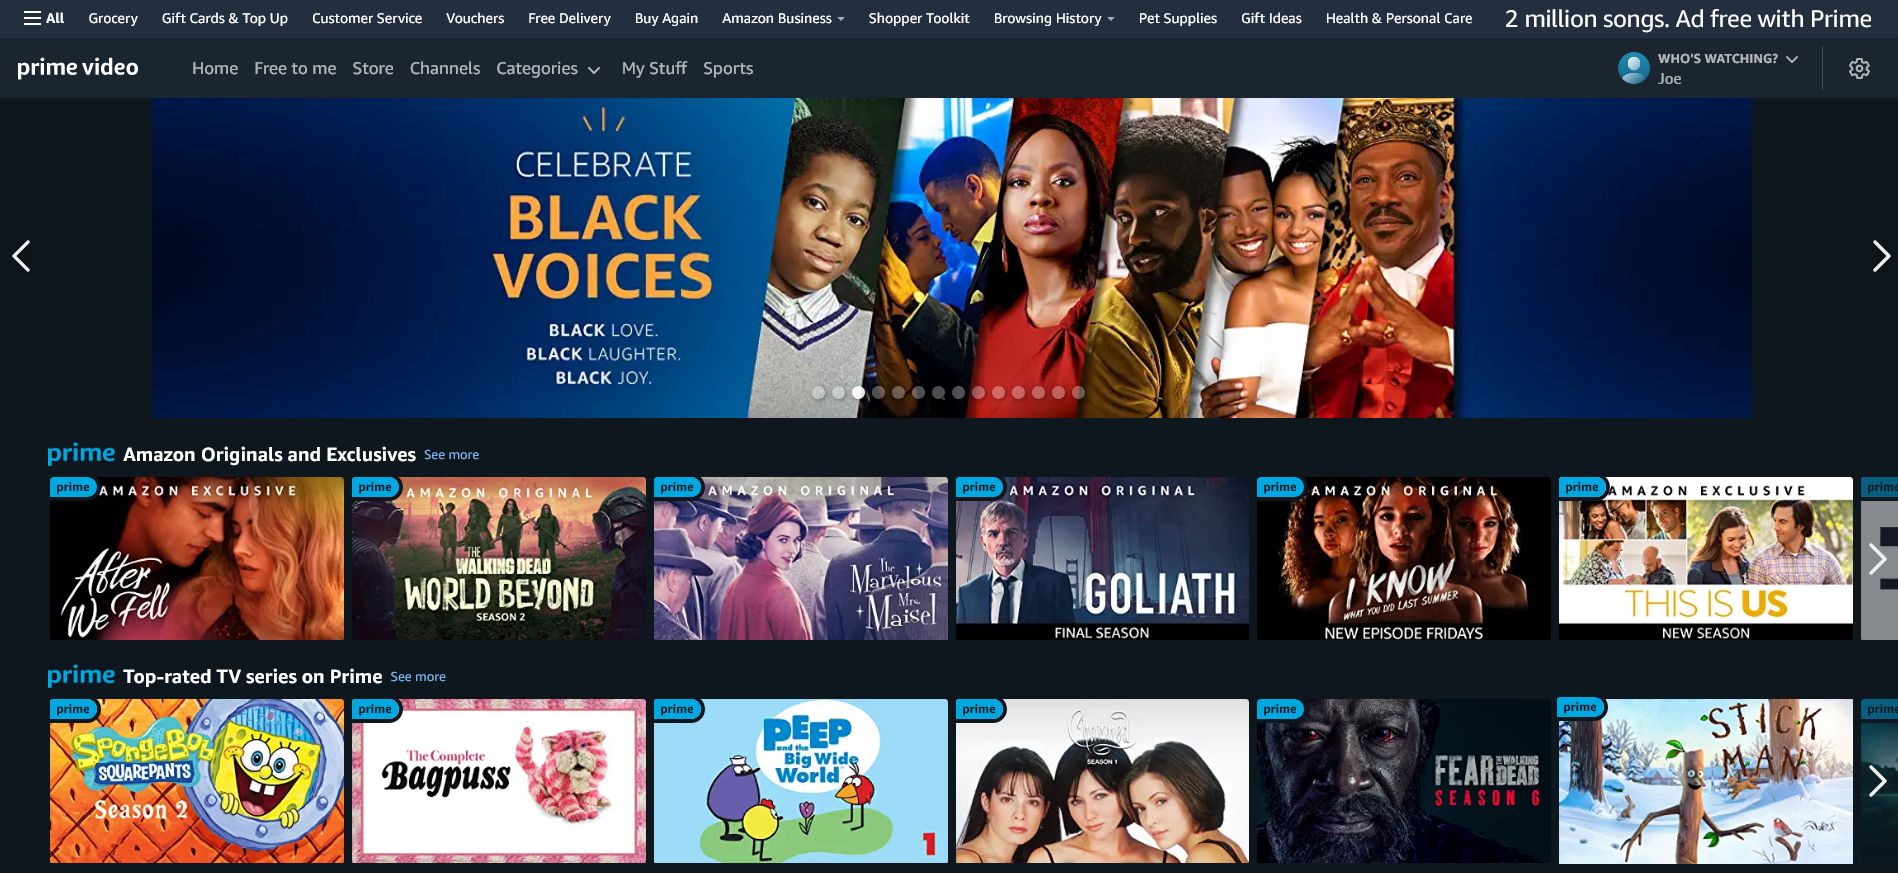 amazon prime video on web browser